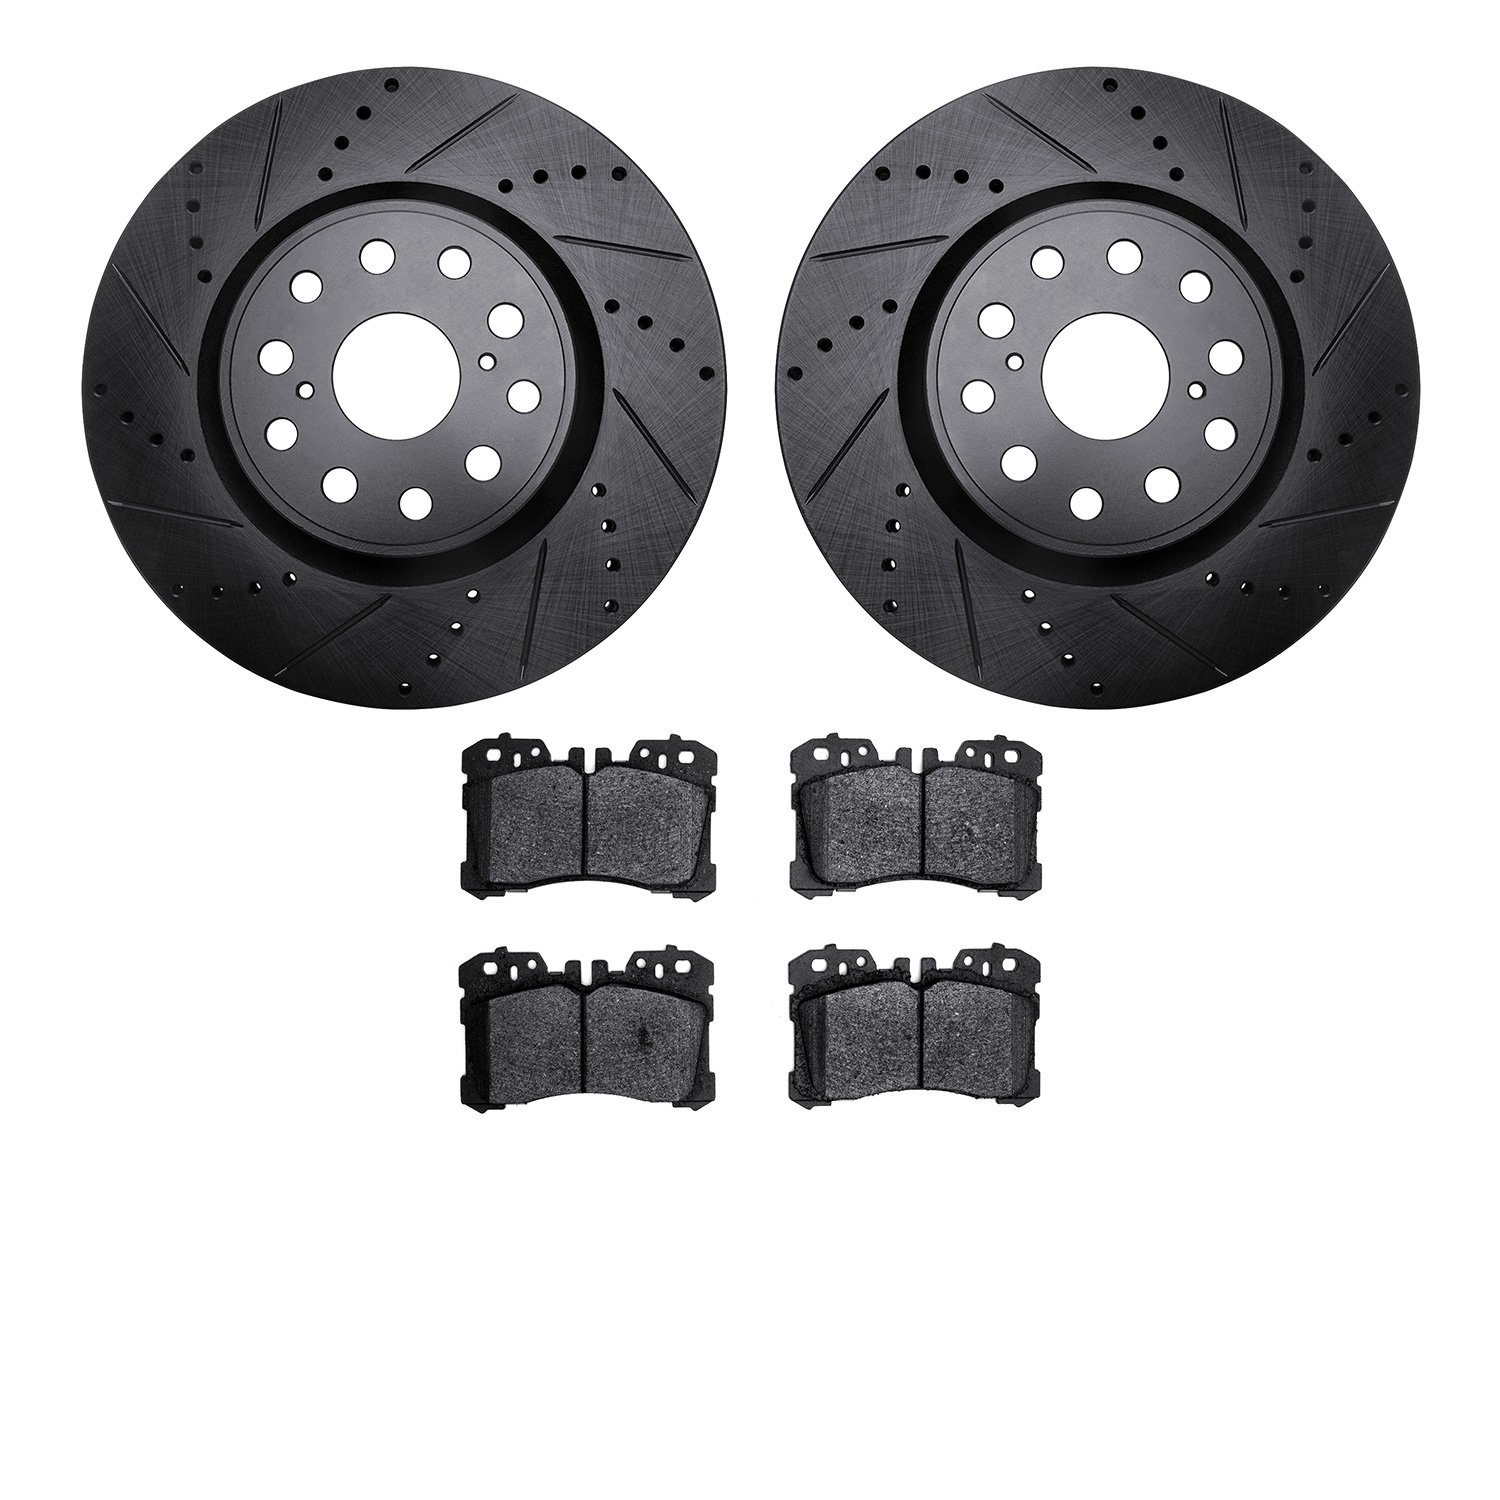 8302-75024 Drilled/Slotted Brake Rotors with 3000-Series Ceramic Brake Pads Kit [Black], Fits Select Lexus/Toyota/Scion, Positio